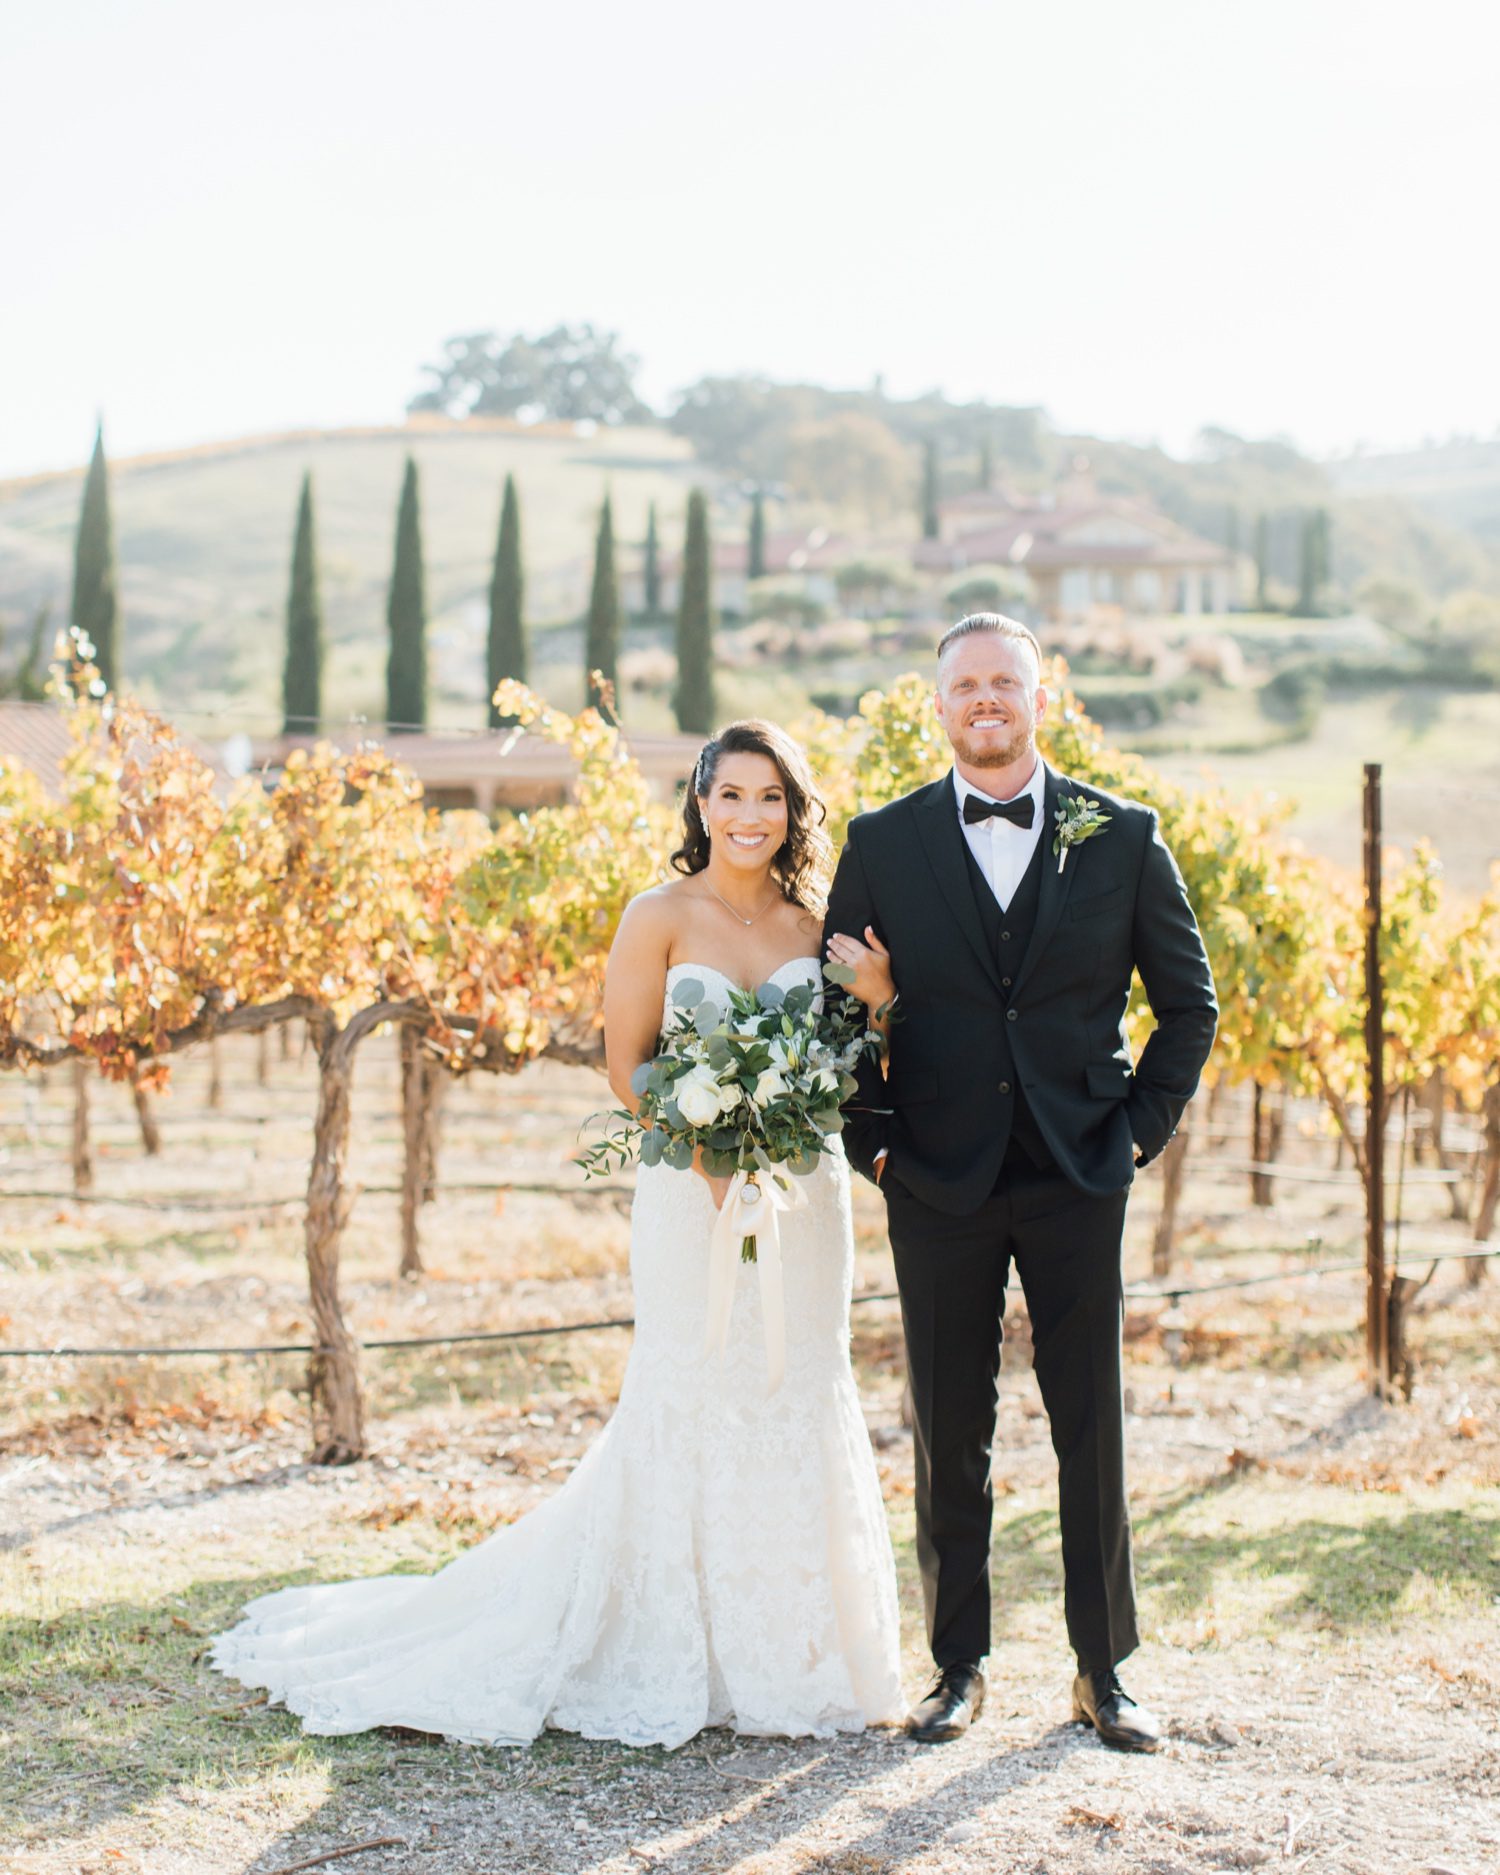 Bride and Groom in front of vineyard at Tuscany inspired wedding at Aterno Estate in Paso Robles California by wine country photographer Jessica Sofranko